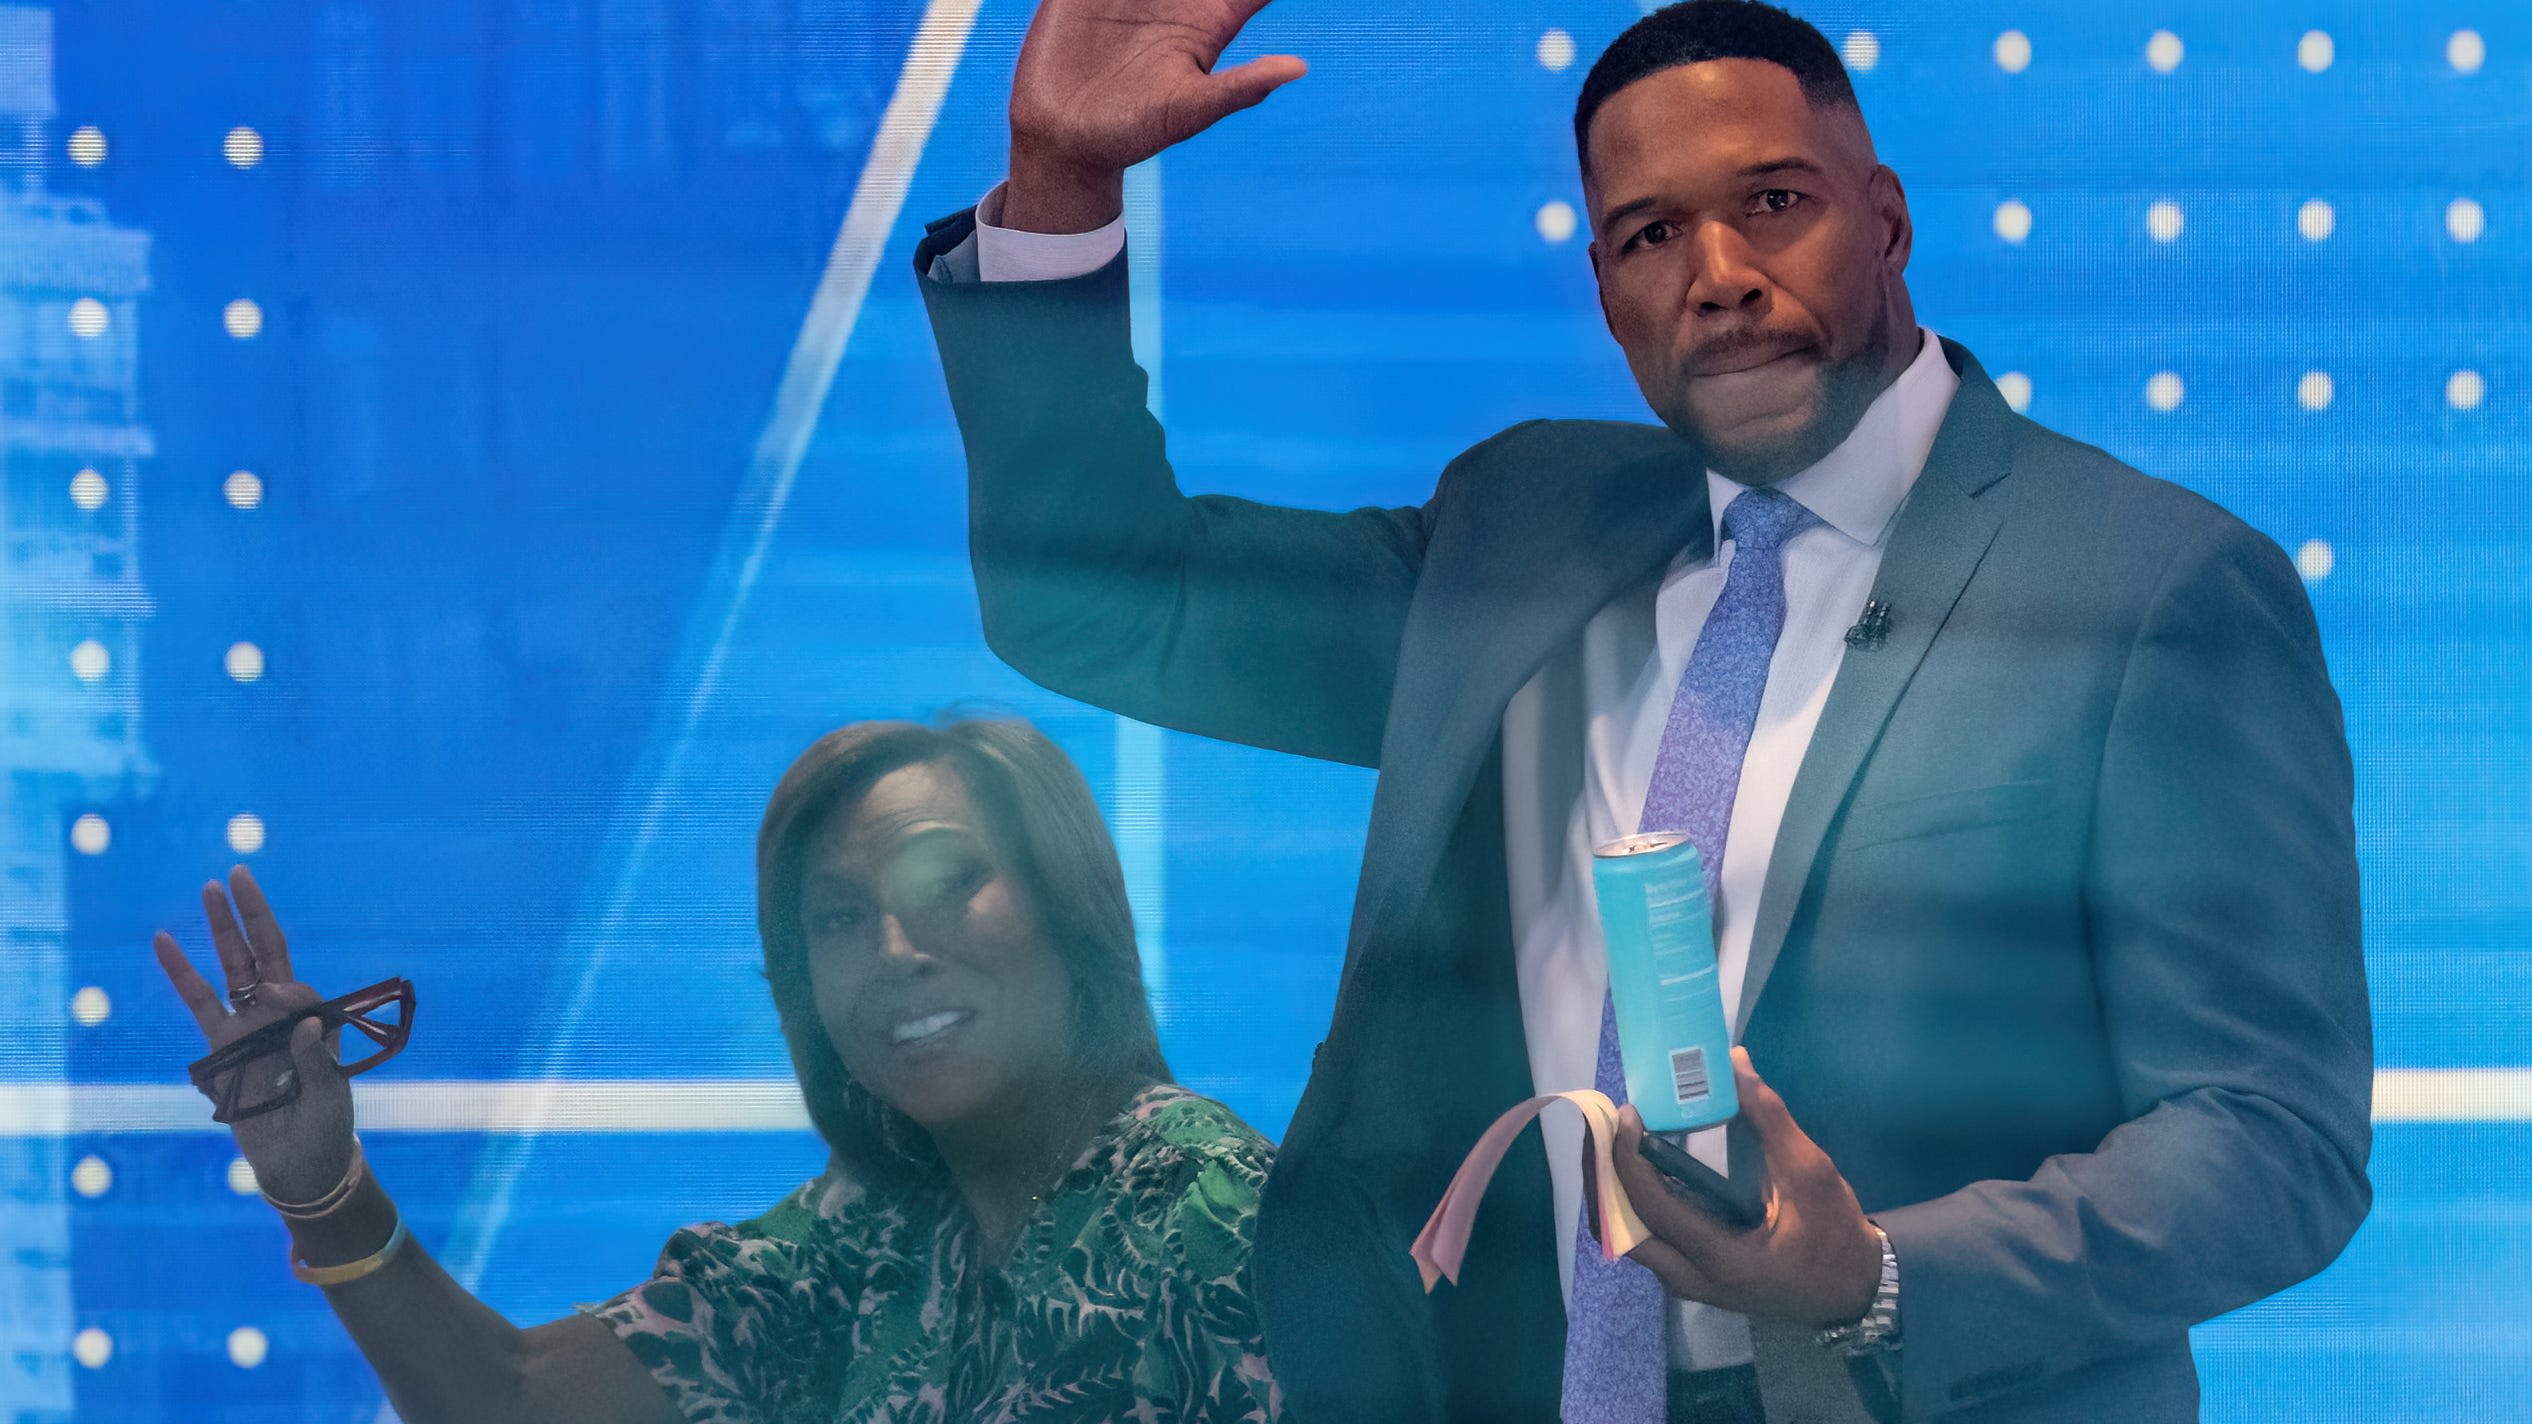 Where is Michael Strahan? What we know about the 'GMA' host's absence